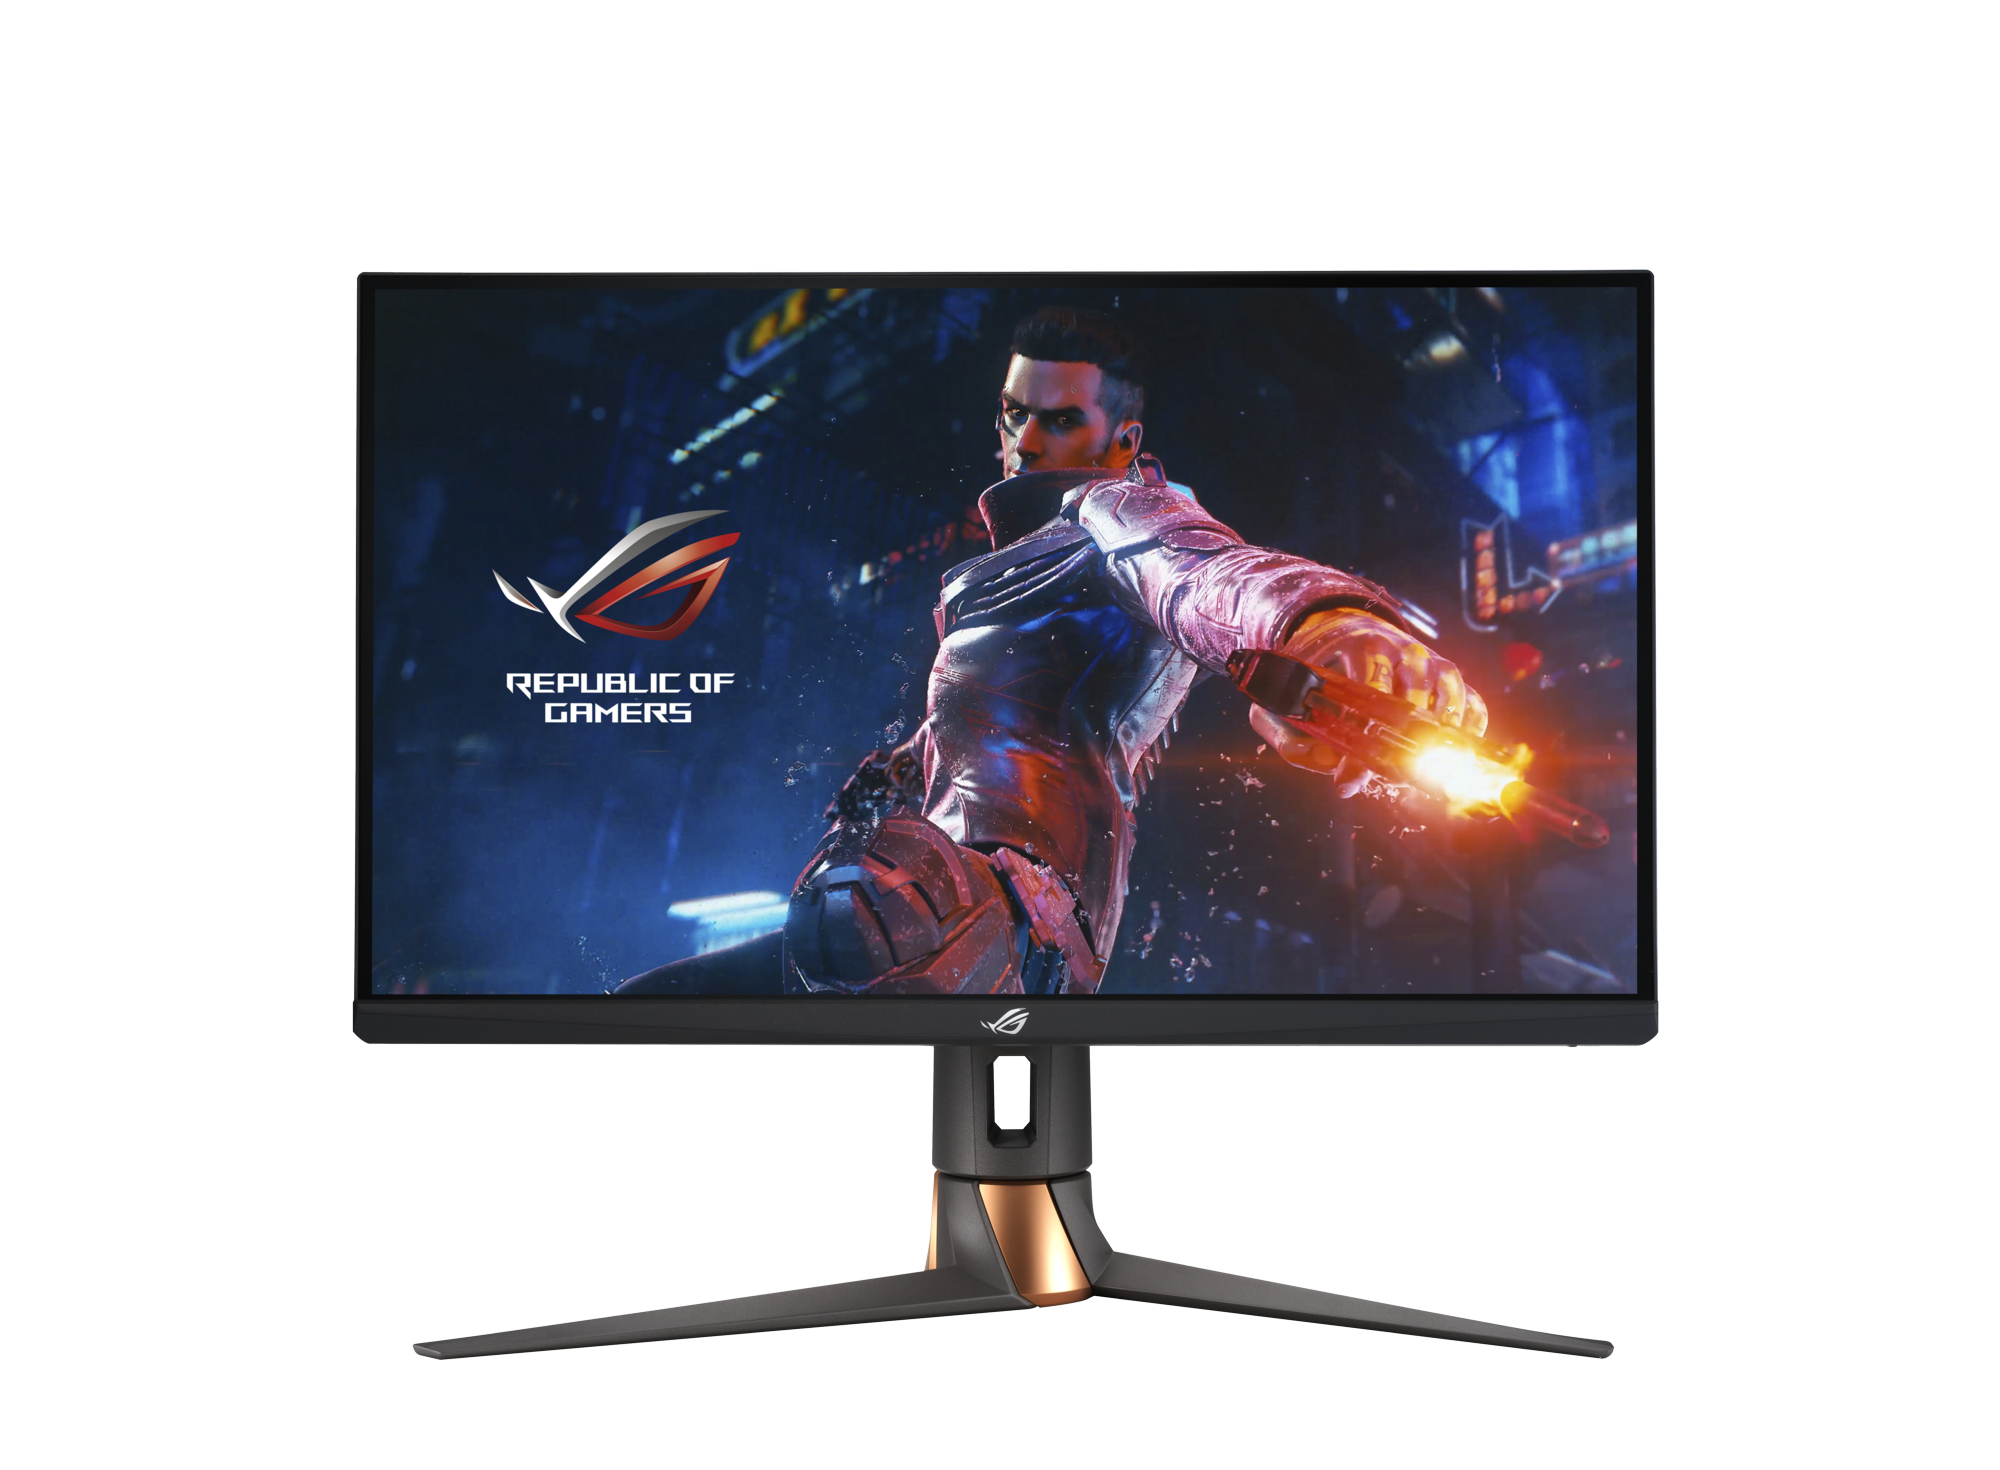 Why Choose a 27” Monitor for QHD 1440p Gaming